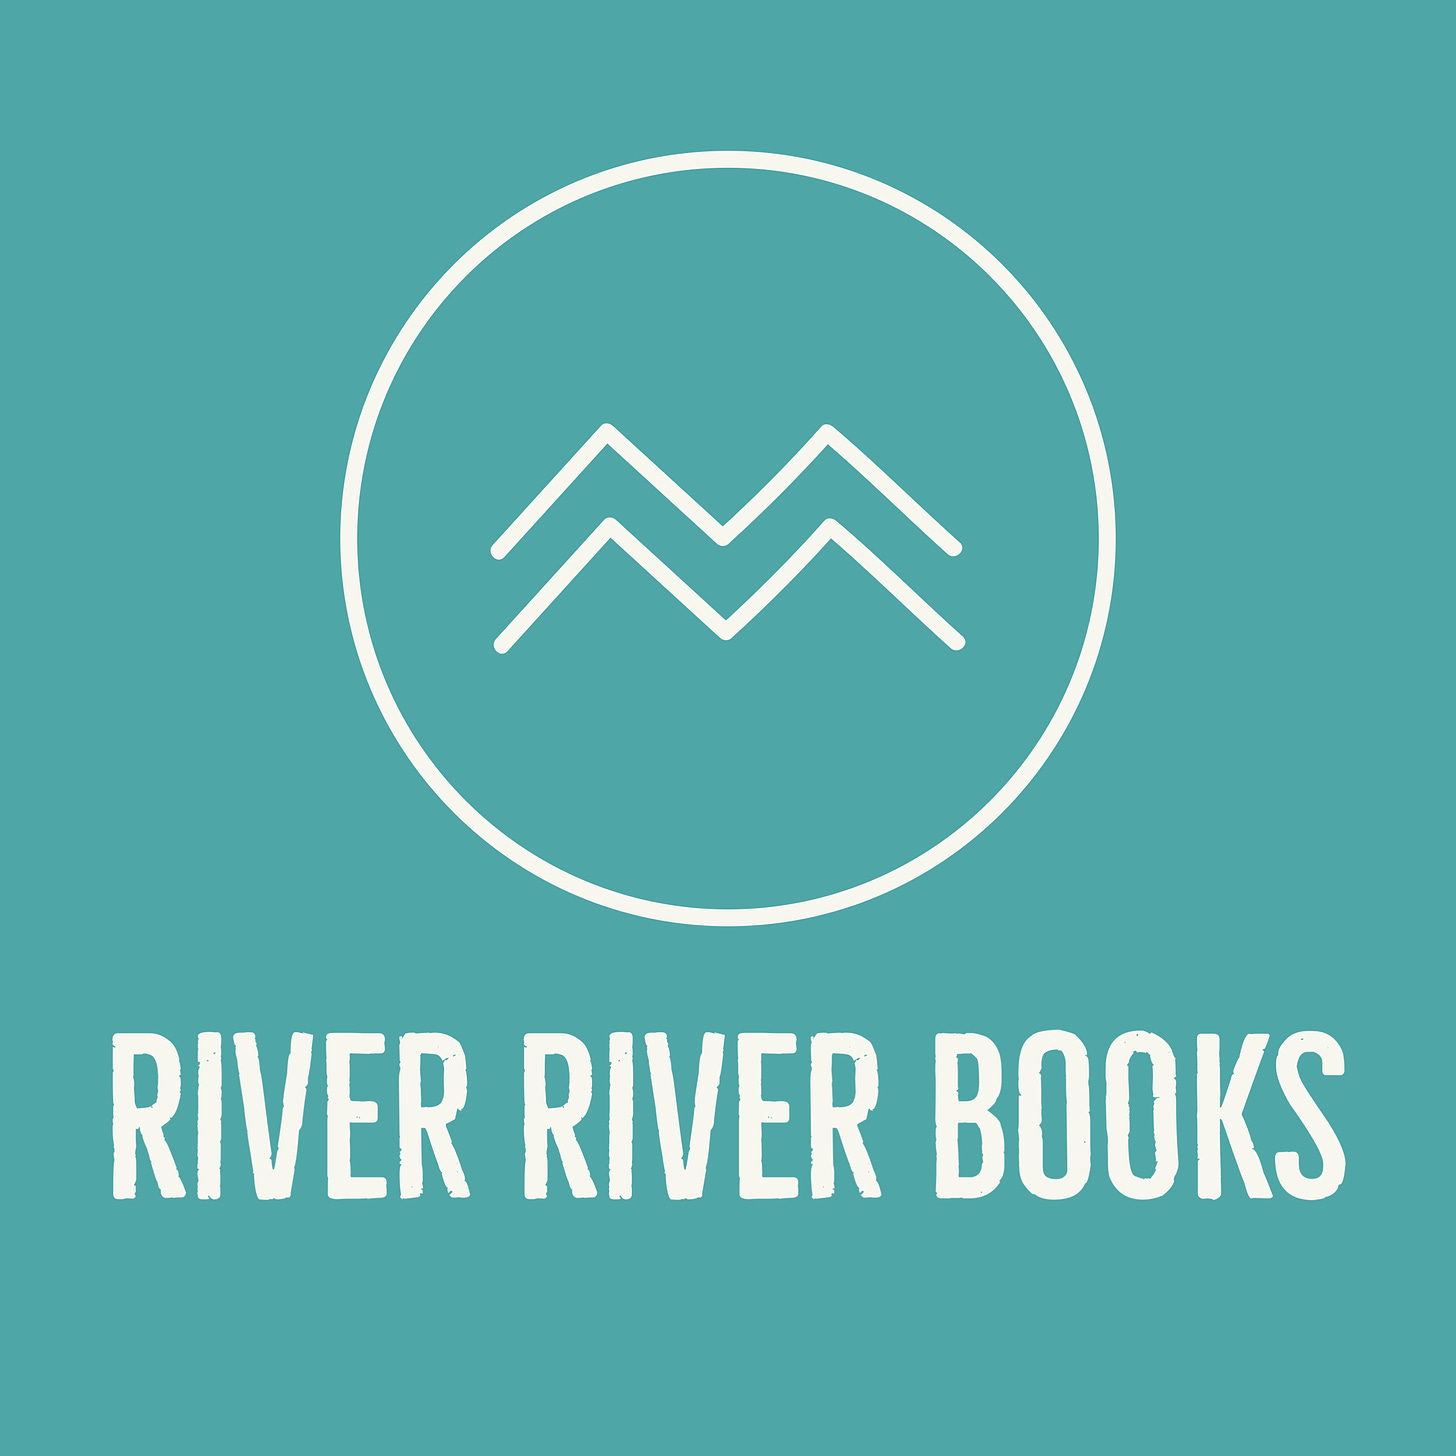 River River Books logo: turquoise background; white circle with two river marks inside. Underneath: RIVER RIVER BOOKS